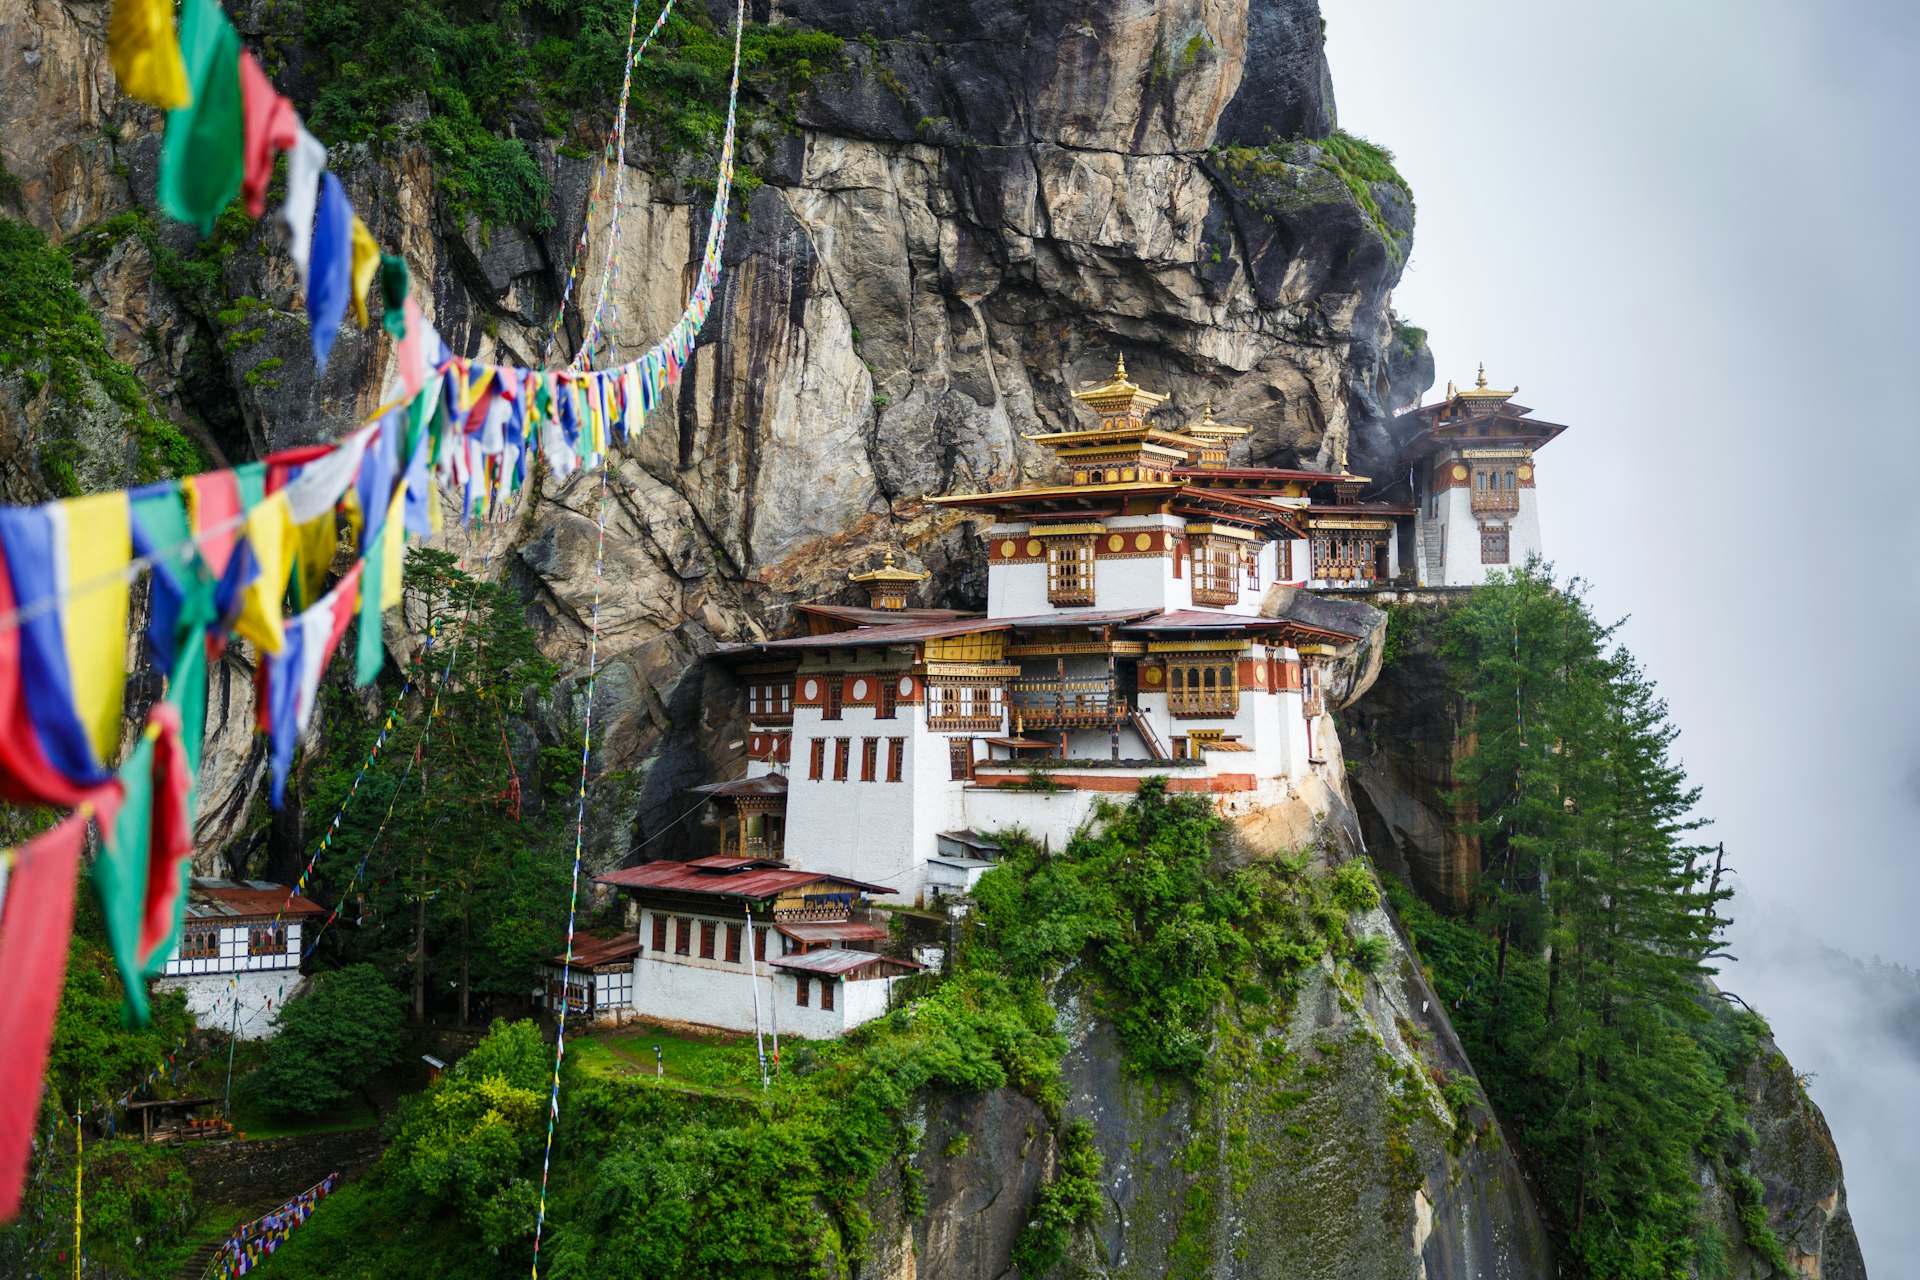 Taktsang (Tiger’s Nest) Monastery, near Paro, Bhutan, a white building clinging to the side of a sheer rock face